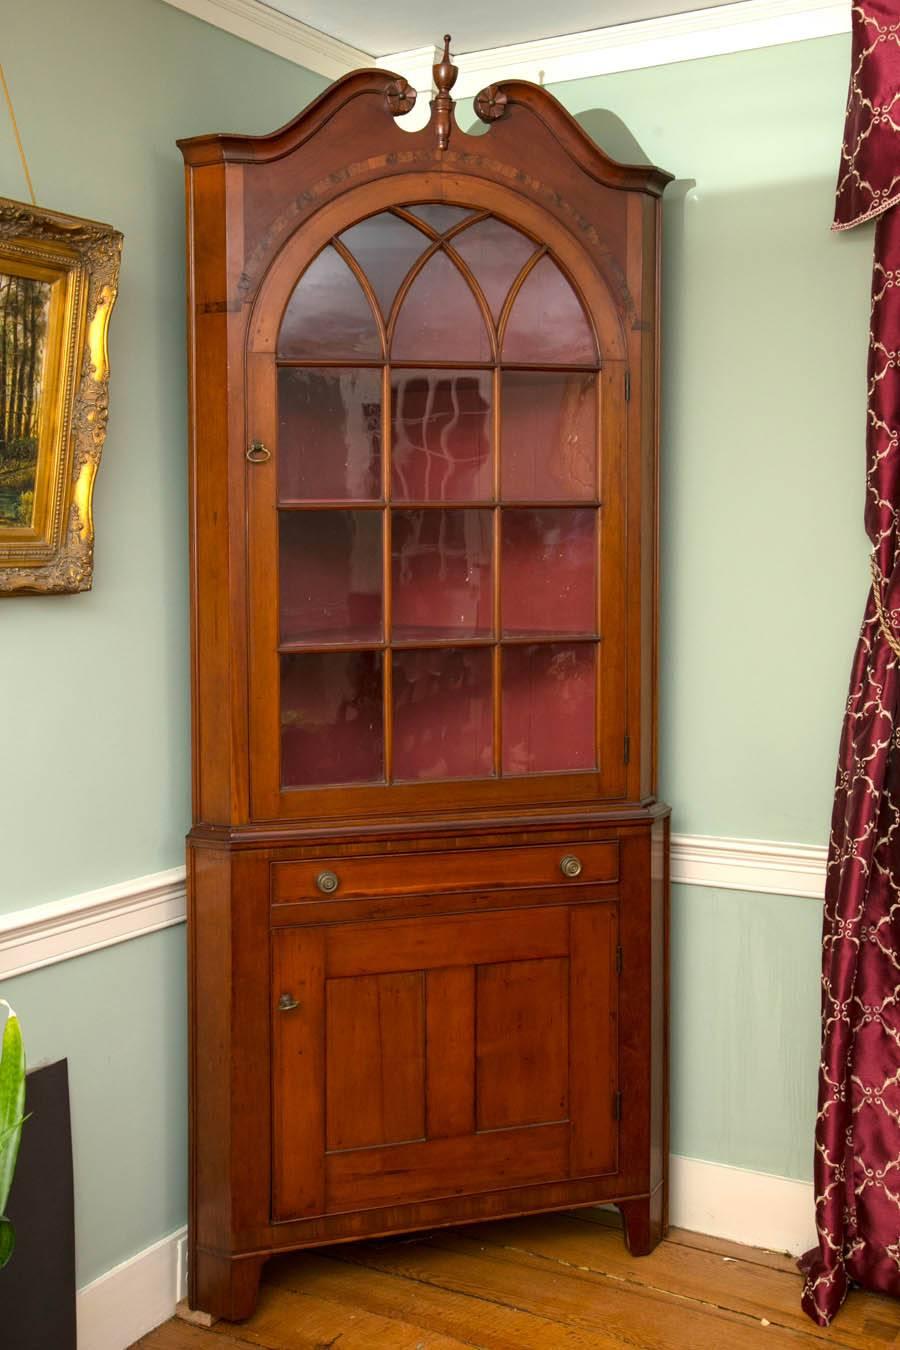 Rare Montgomery county, Pennsylvania Hepplewhite two-piece broken-arch cherry corner cupboard with carved rosettes, arcaded door, spoon rack, with drawer at the waist. Spectacular inlaid burl over the arched door. Excellent proportions,

circa